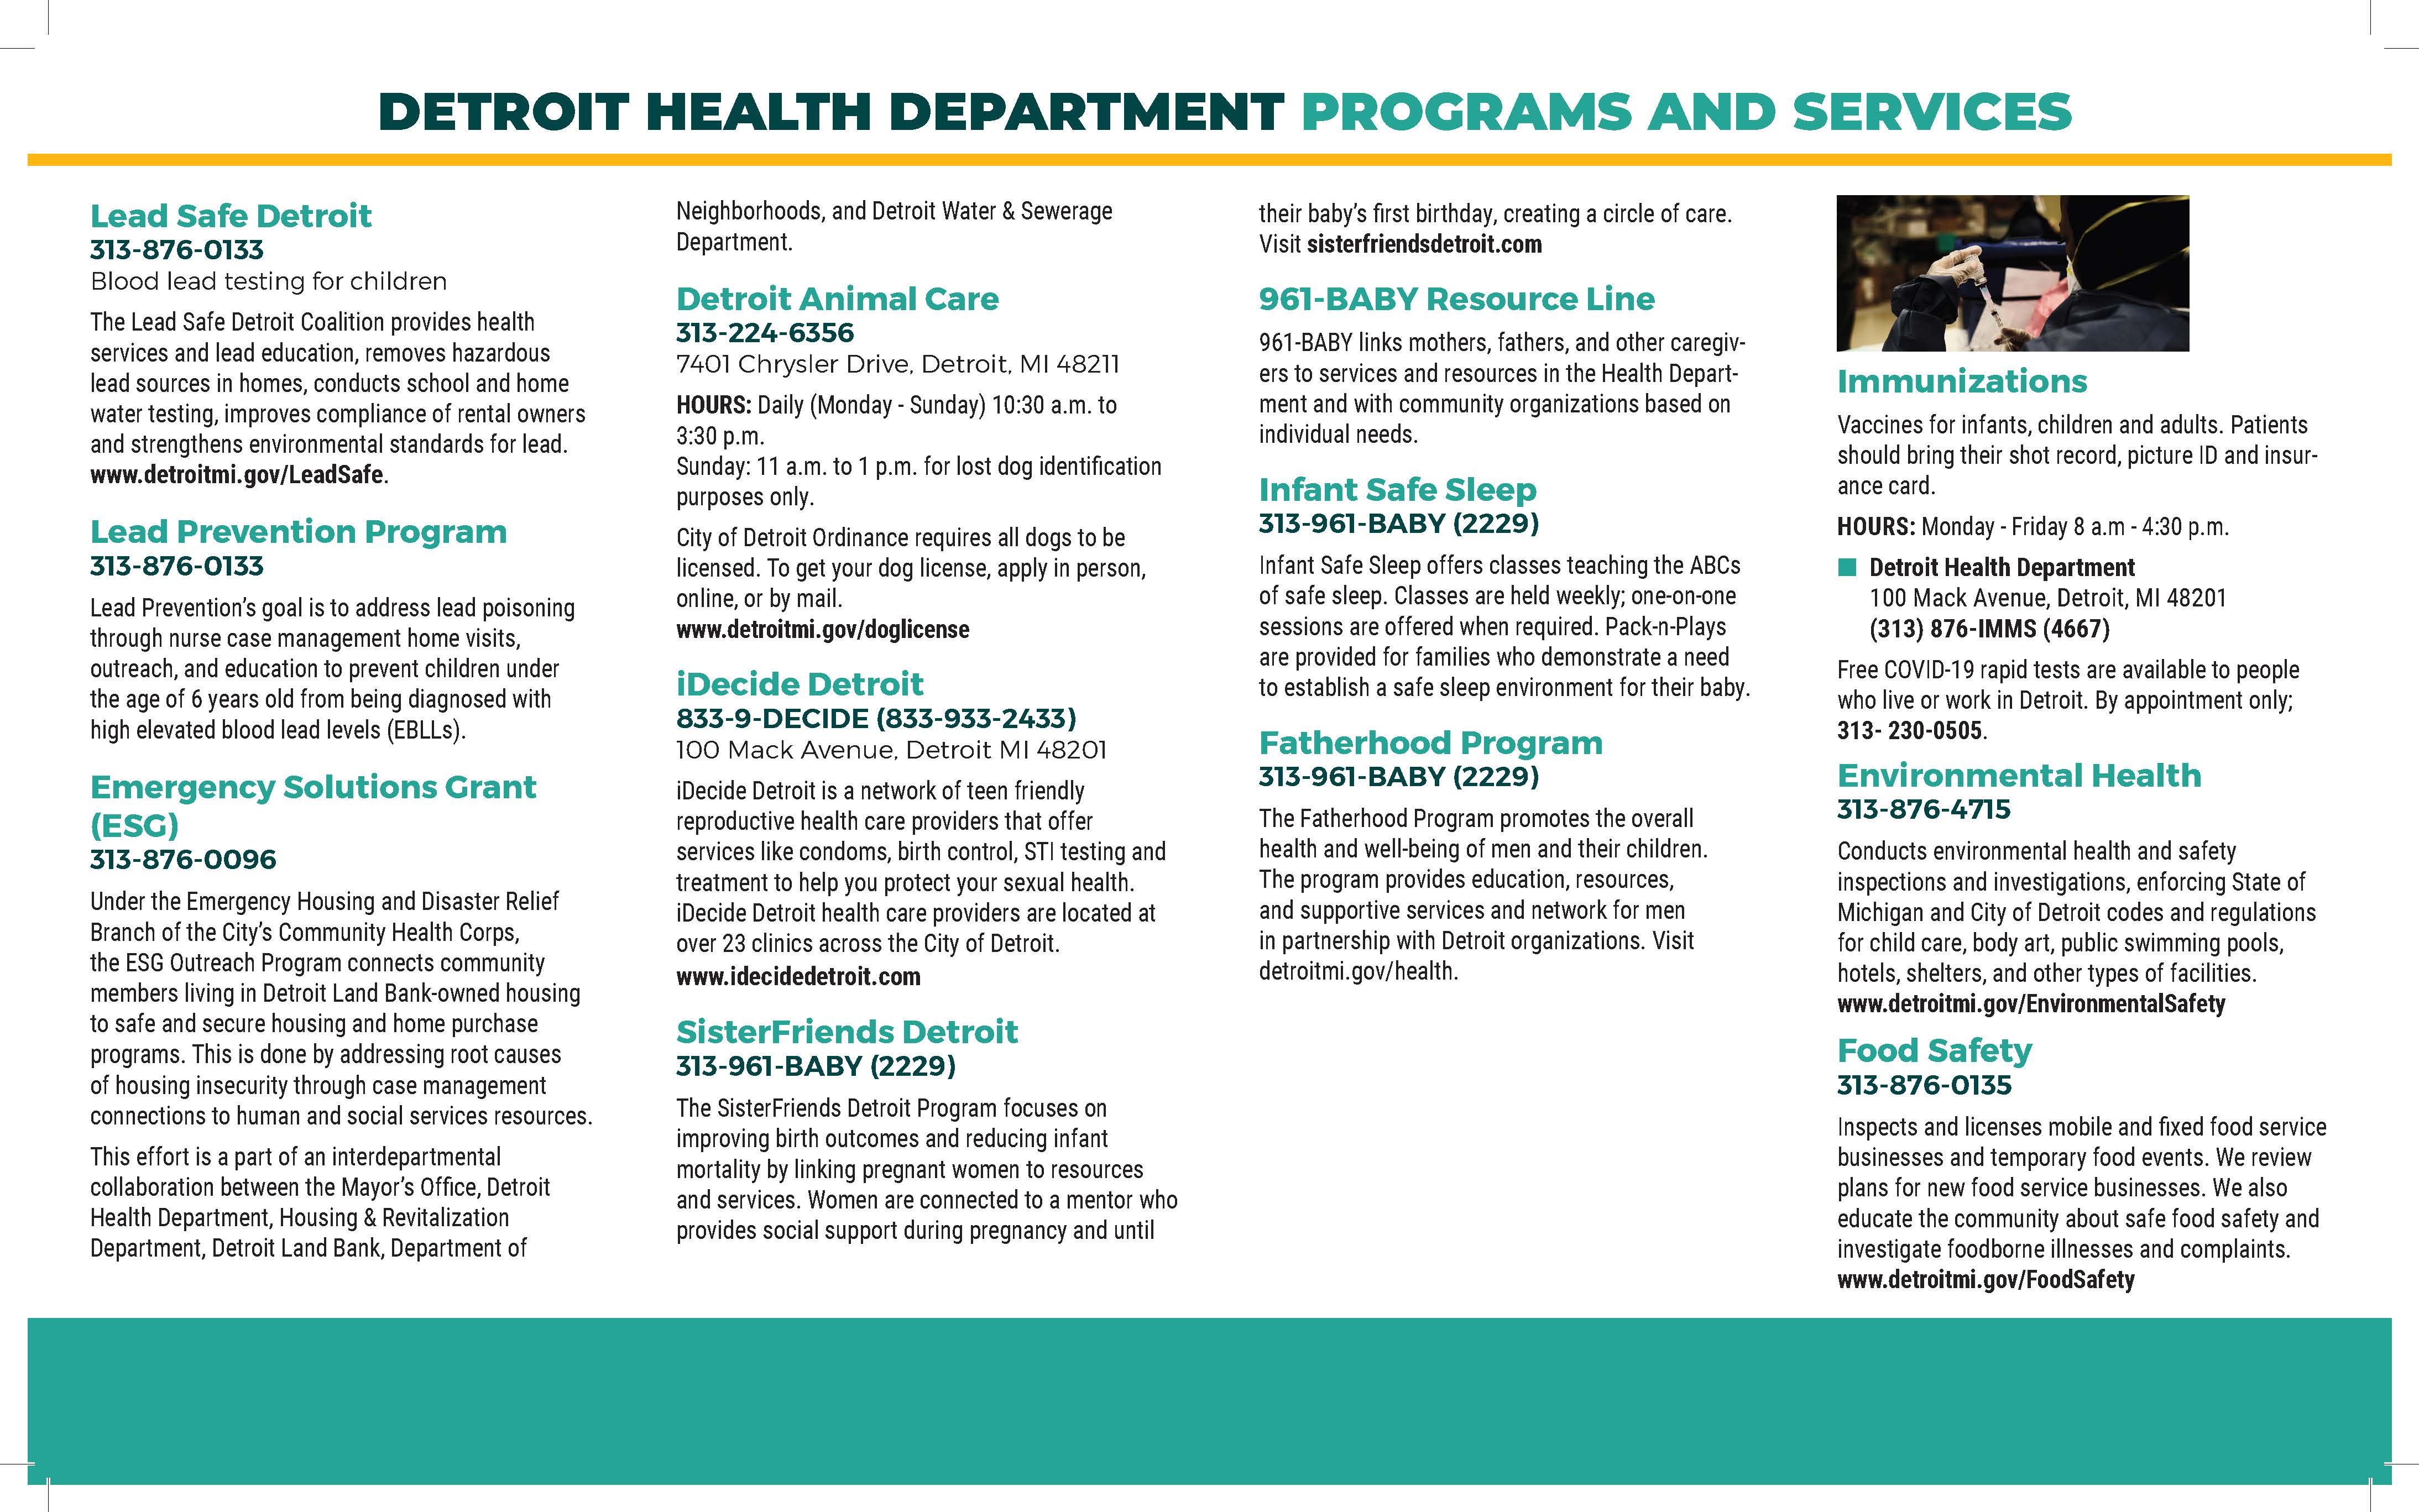 Programs and Services at the Detroit Health Department